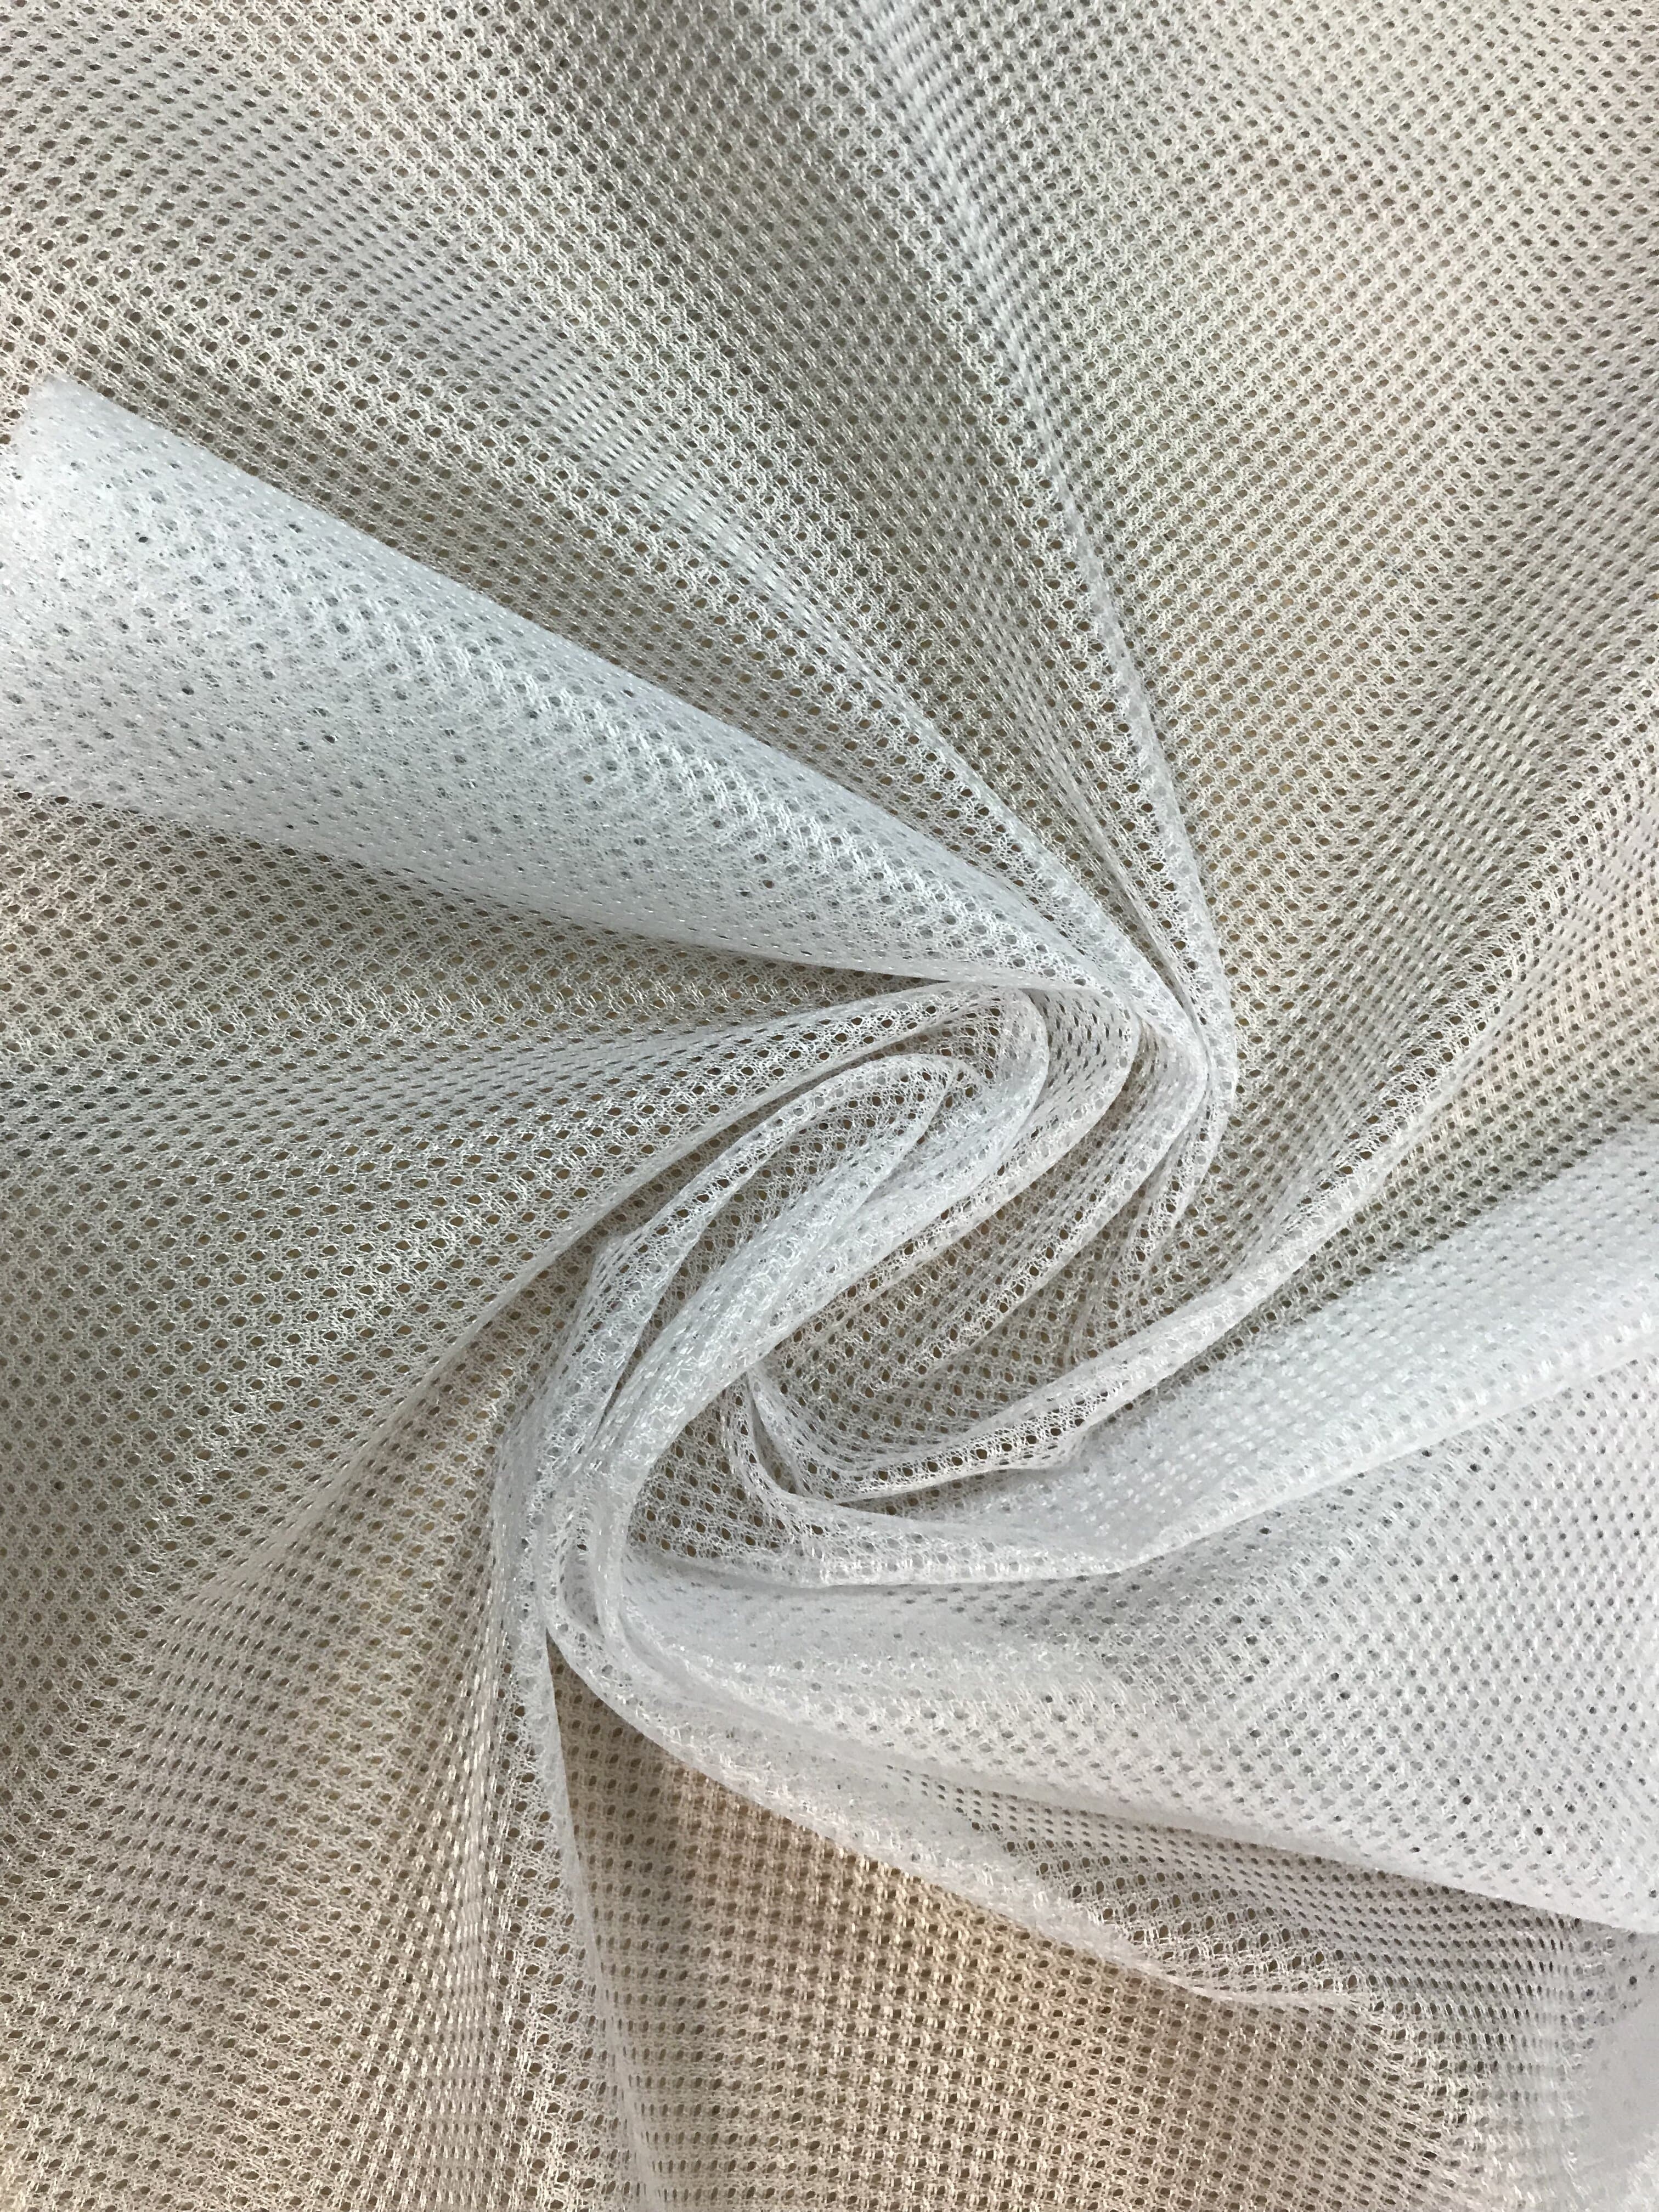 SOFT POLYESTER STRETCH MESH LINING FABRIC 65GSM - 01 WHITE 150CM WIDE ROLL